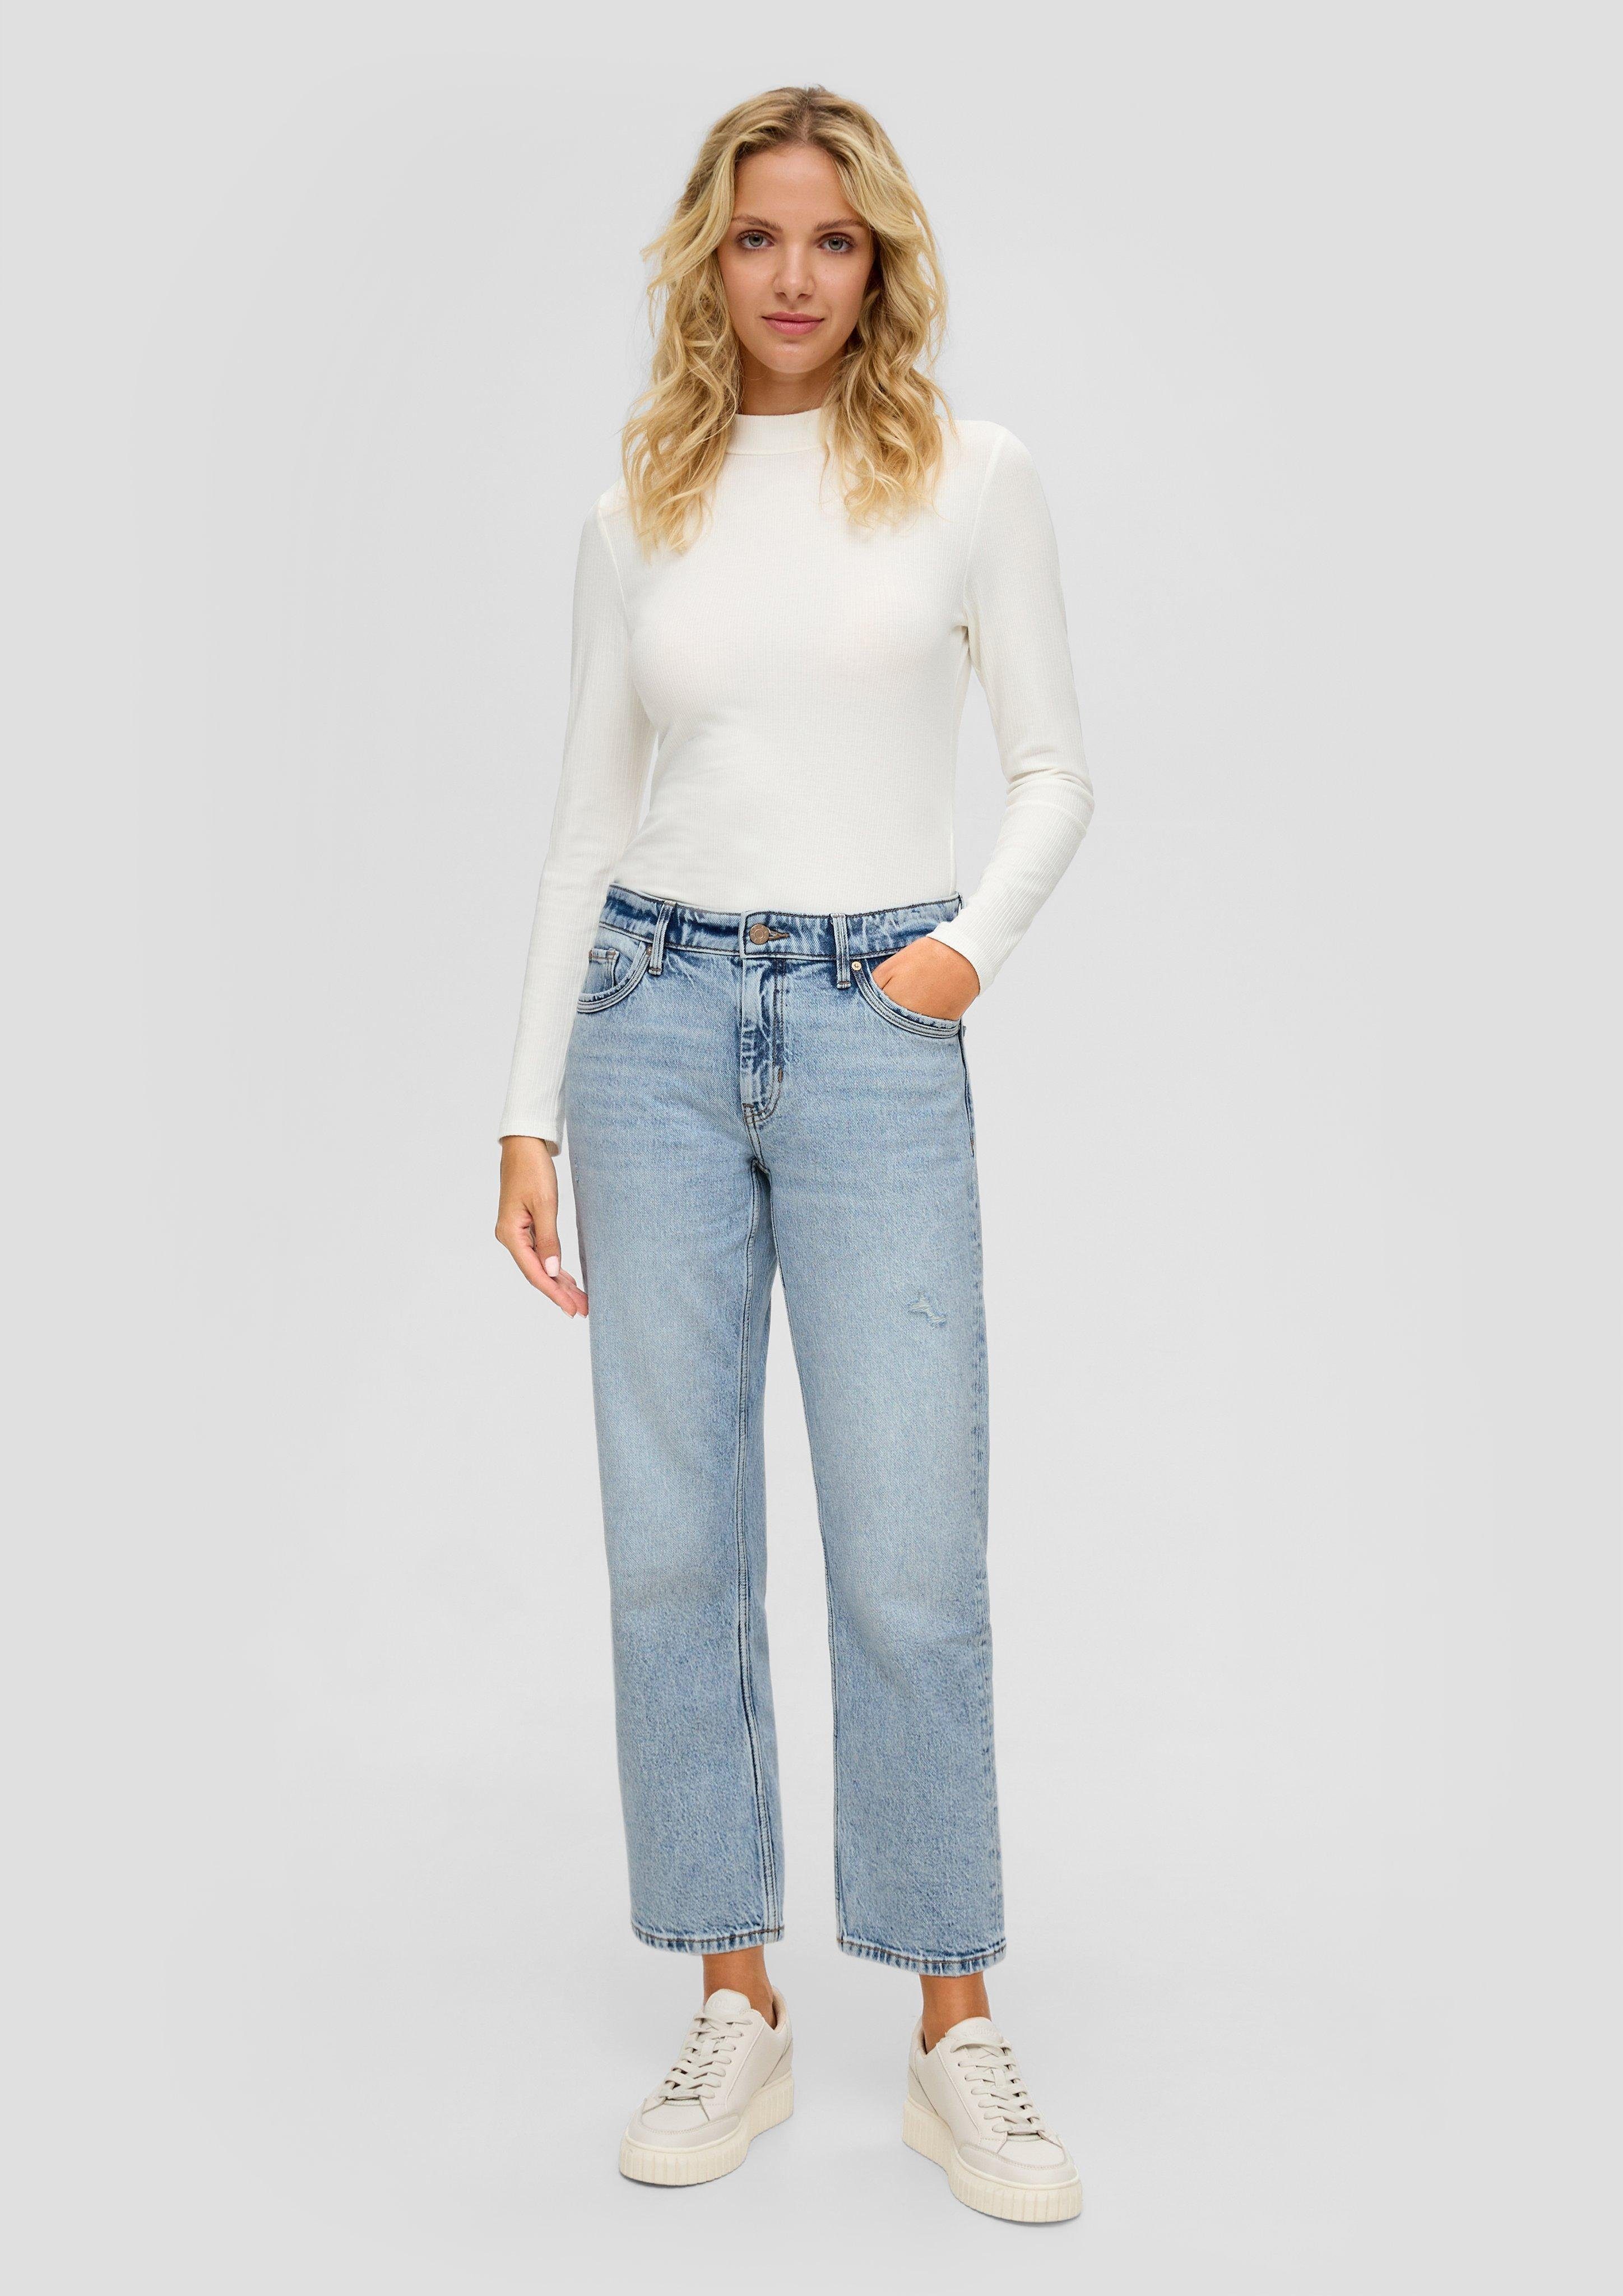 s.Oliver 7/8-Jeans Cropped-Jeans Karolin / Regular Fit / Mid Rise / Straight Leg Waschung